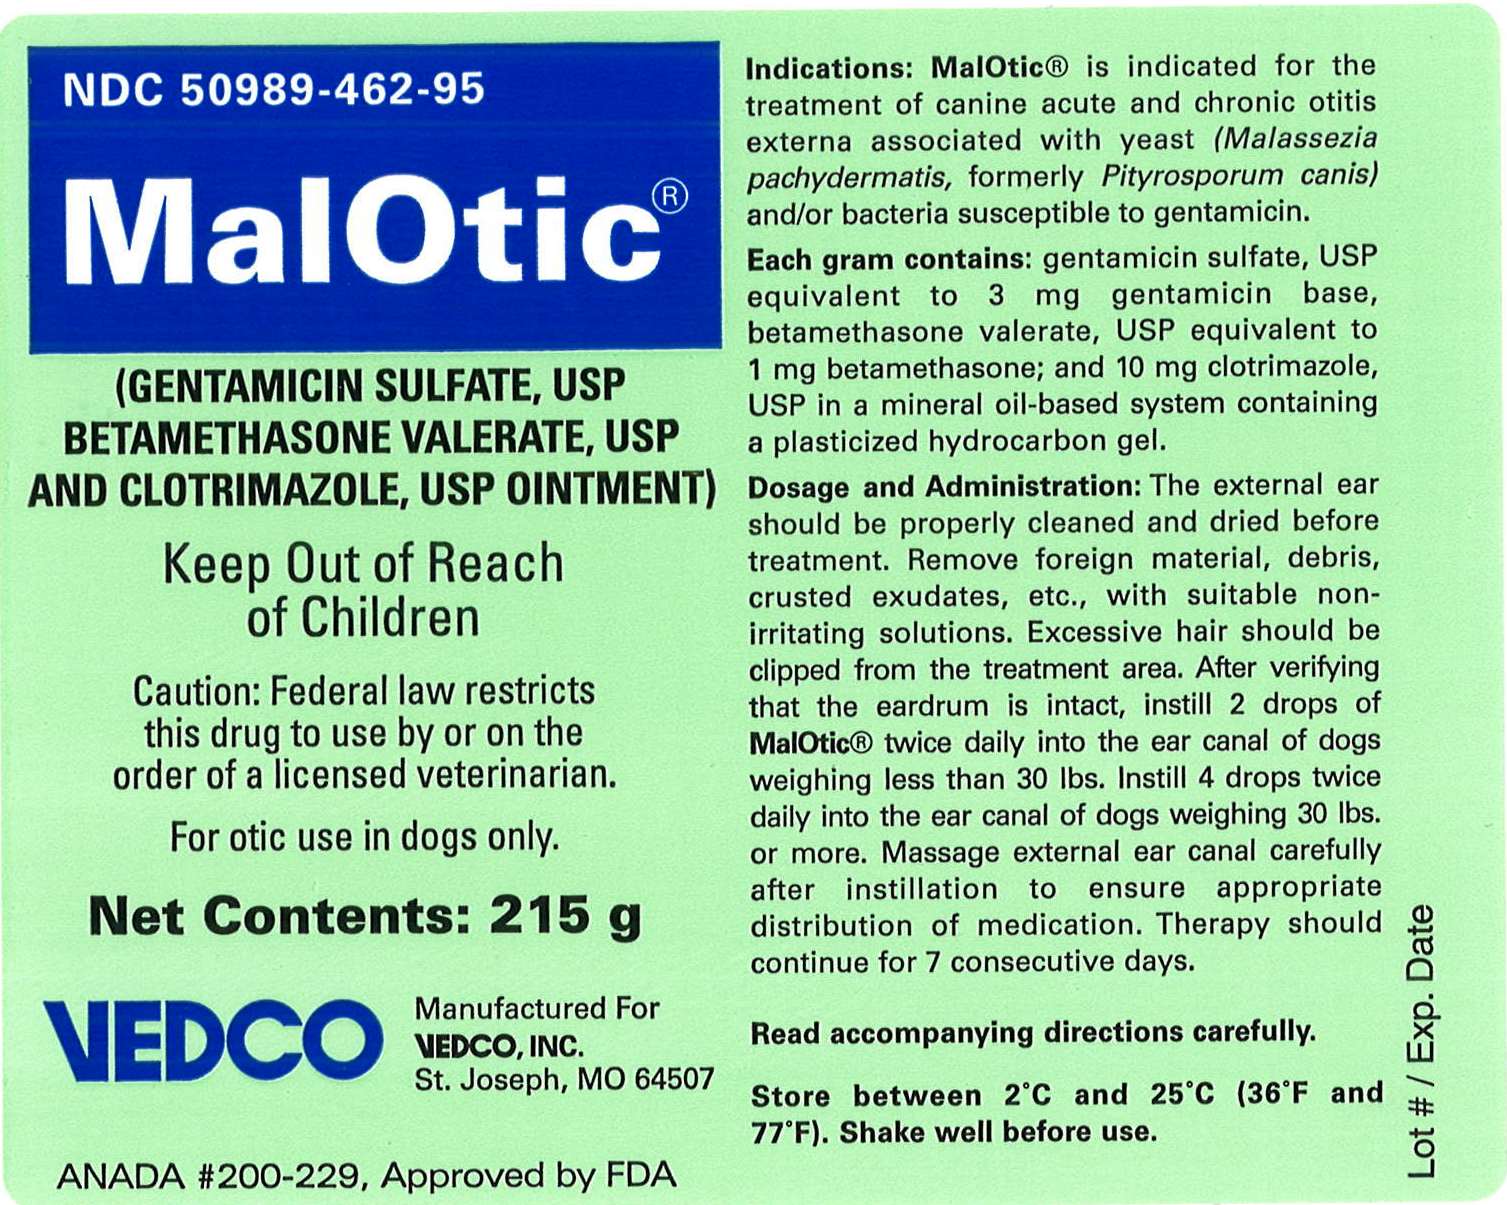 MalOtic Ointment 215g Bottle